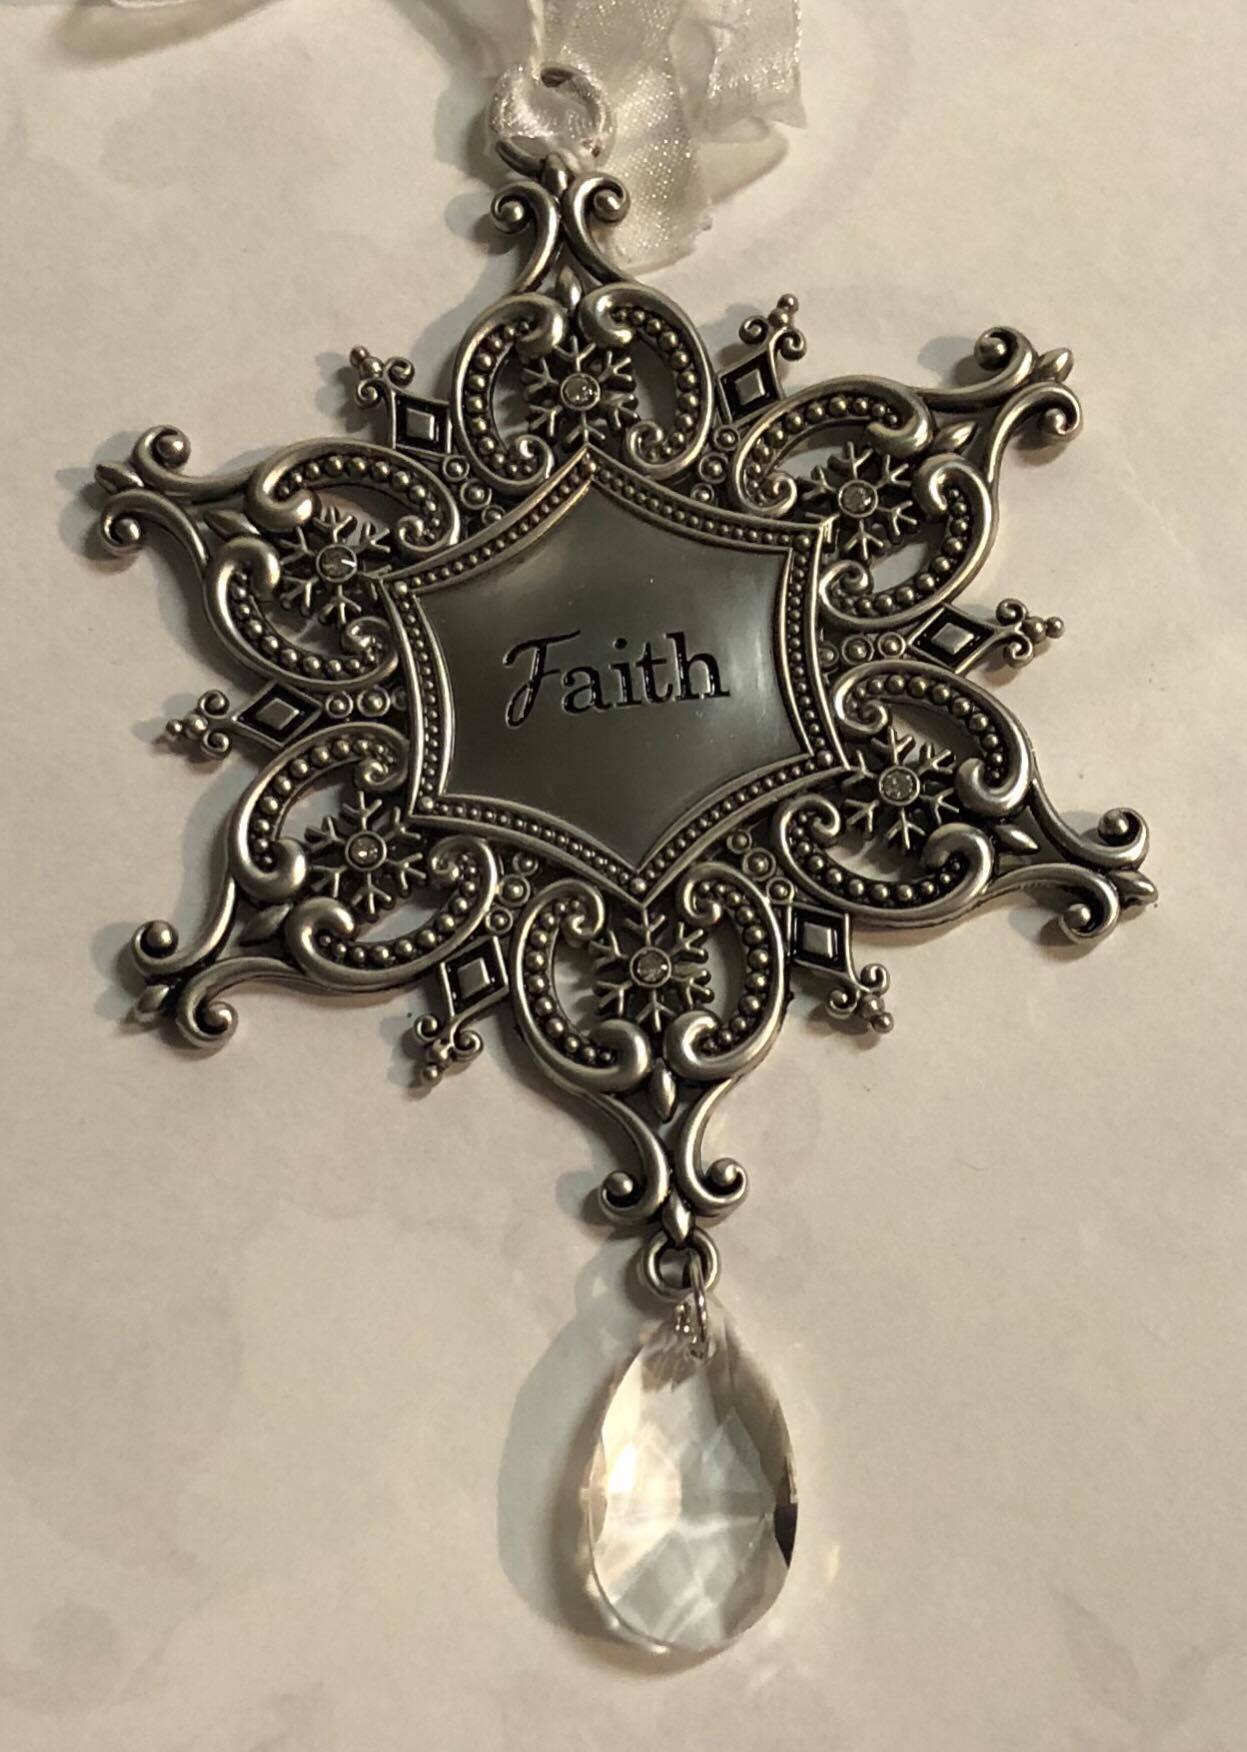 Snowflake Tree Ornament with Hanging Charm "Faith"